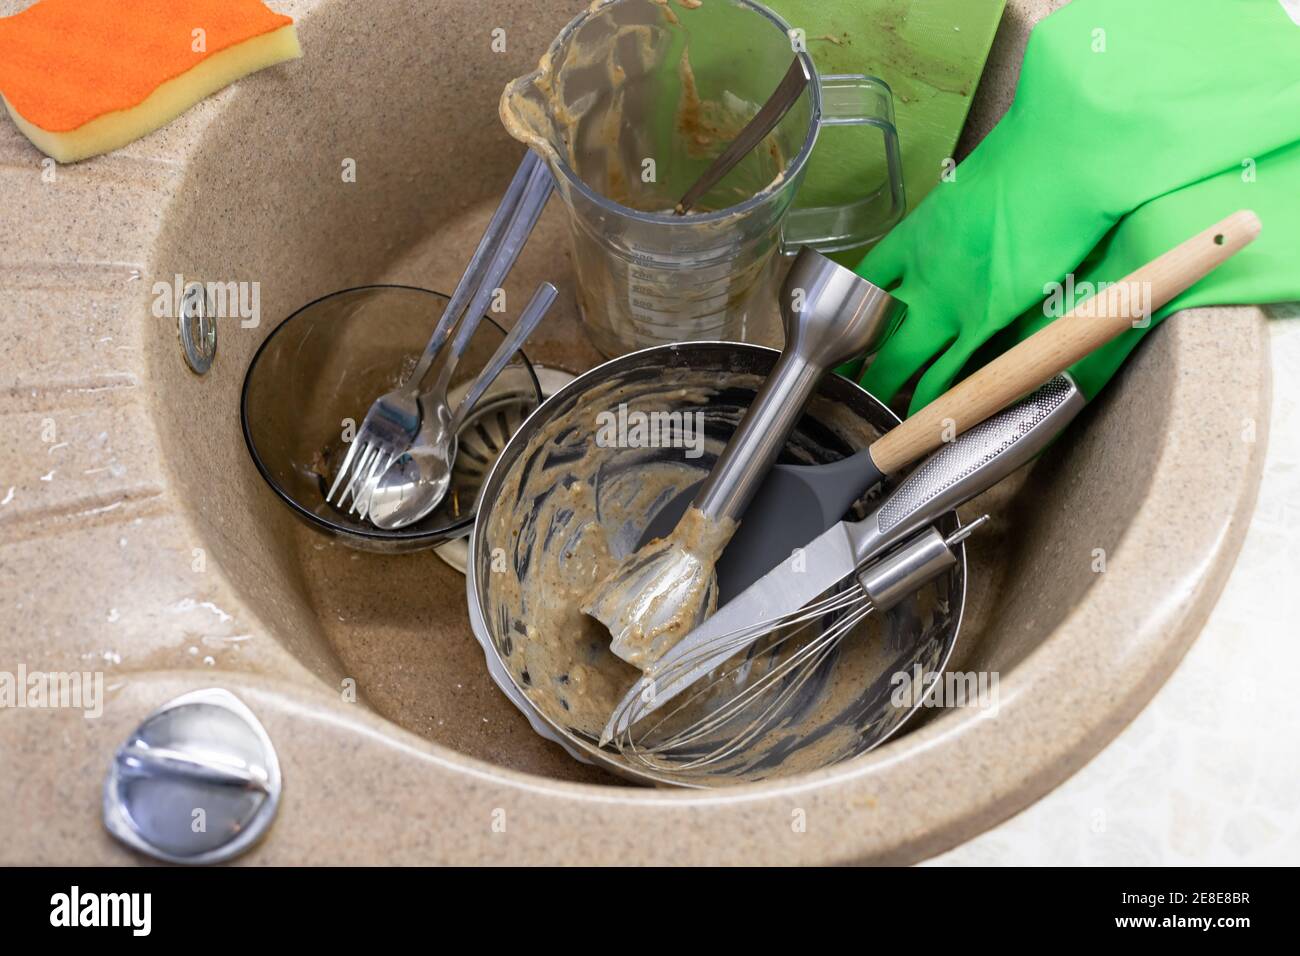 Unwashed dishes and utensils in kitchen sink, latex gloves and washing sponge Stock Photo